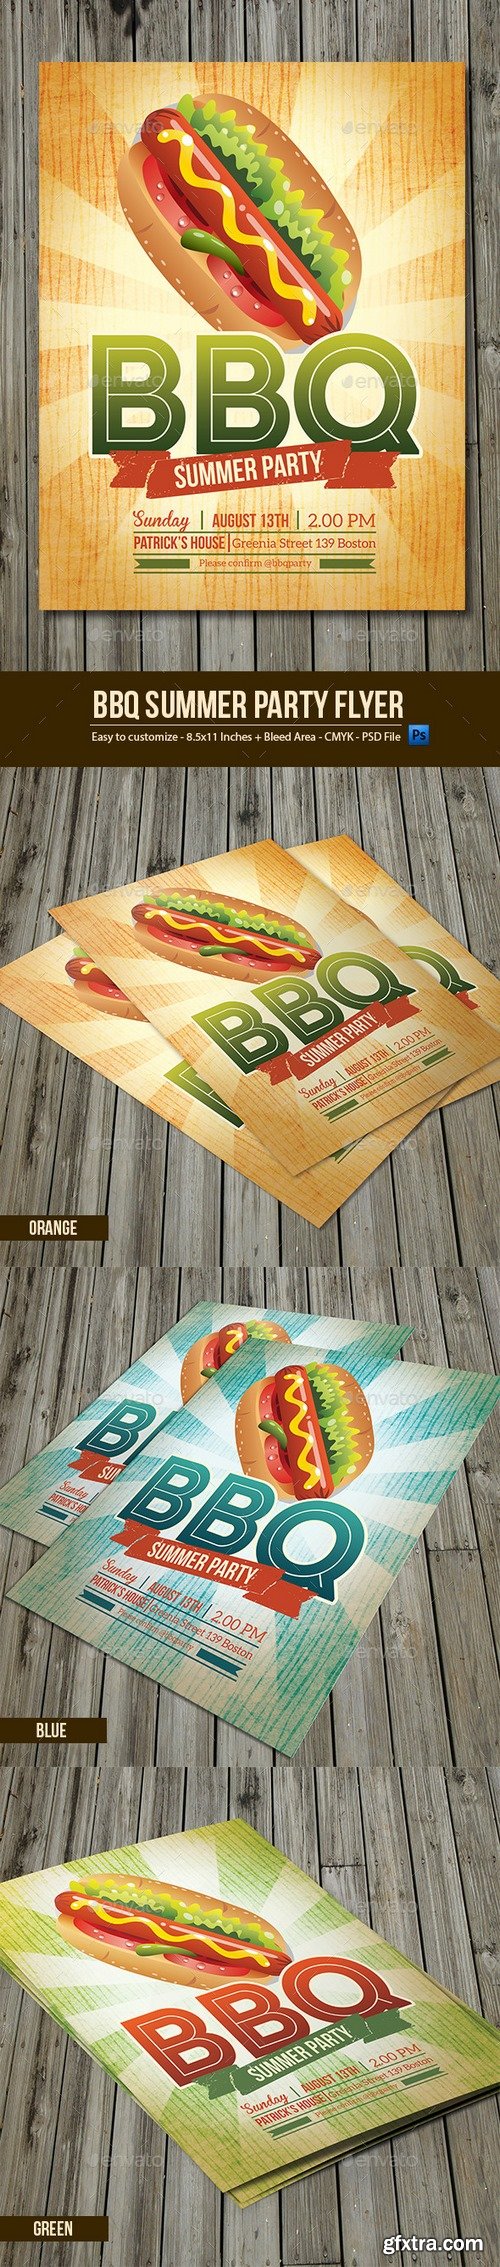 Graphicriver - BBQ Summer Party Flyer 9997740